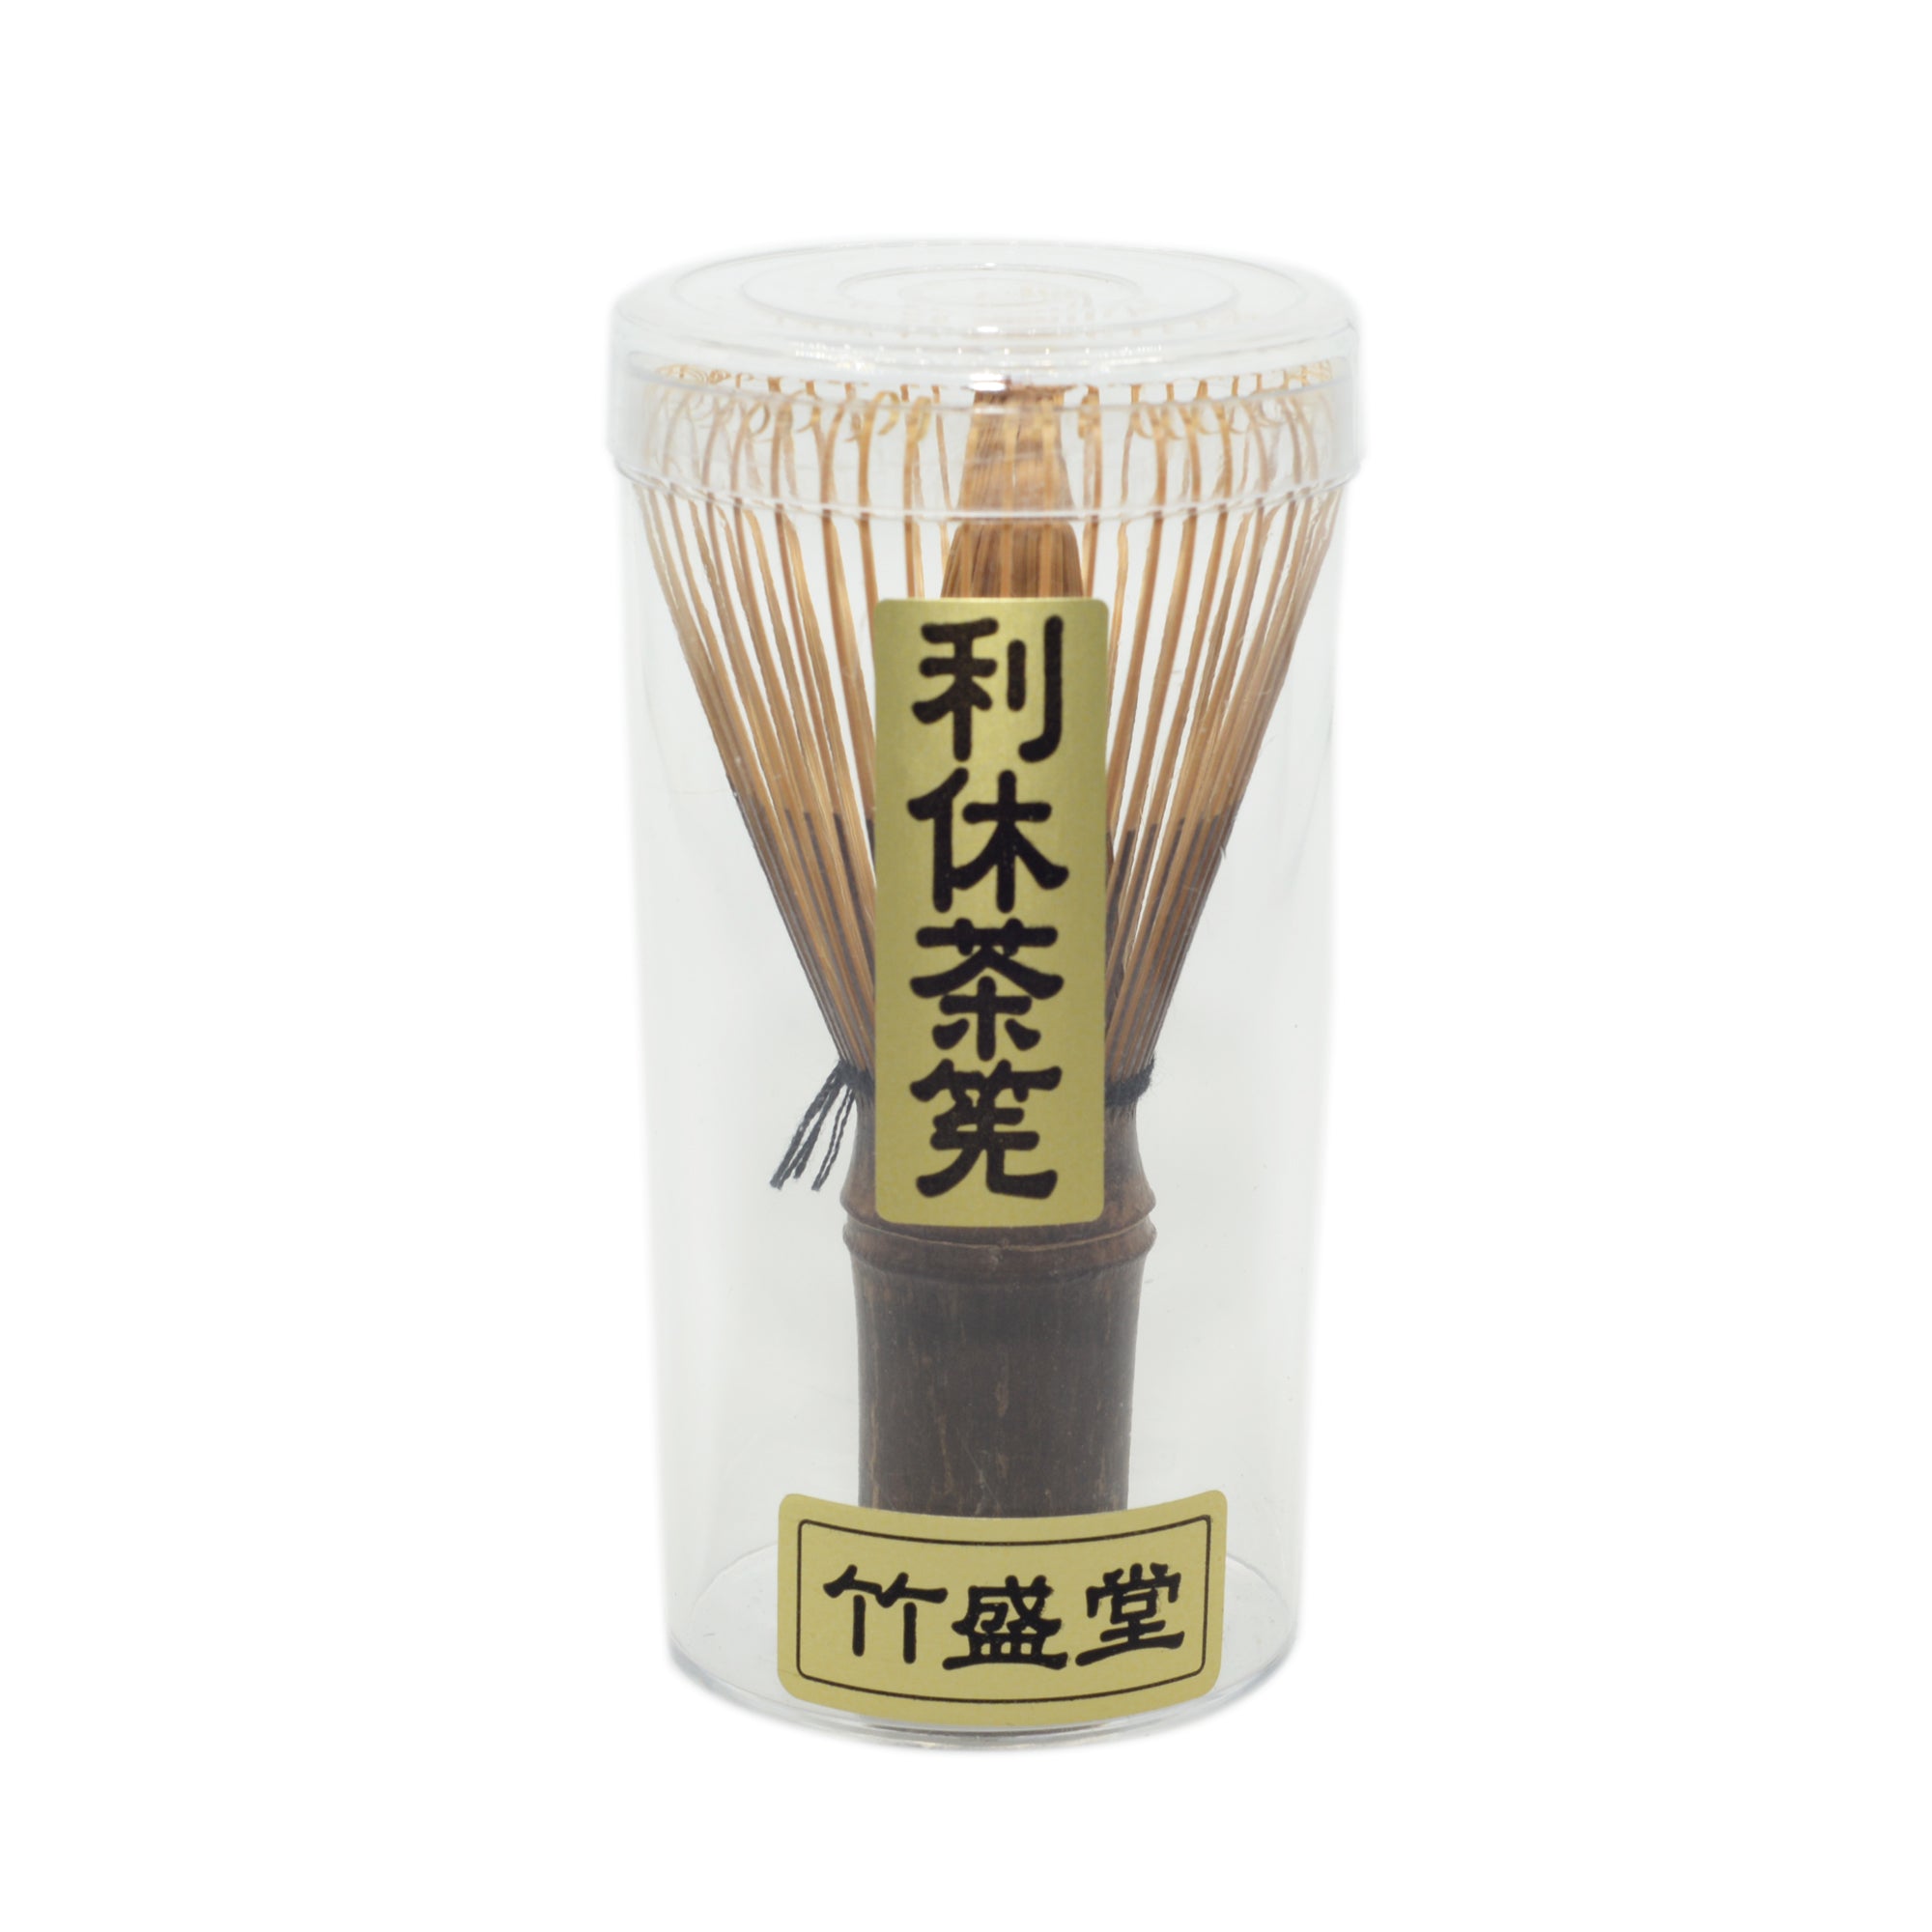 Bamboo Tea Whisk made in Japan